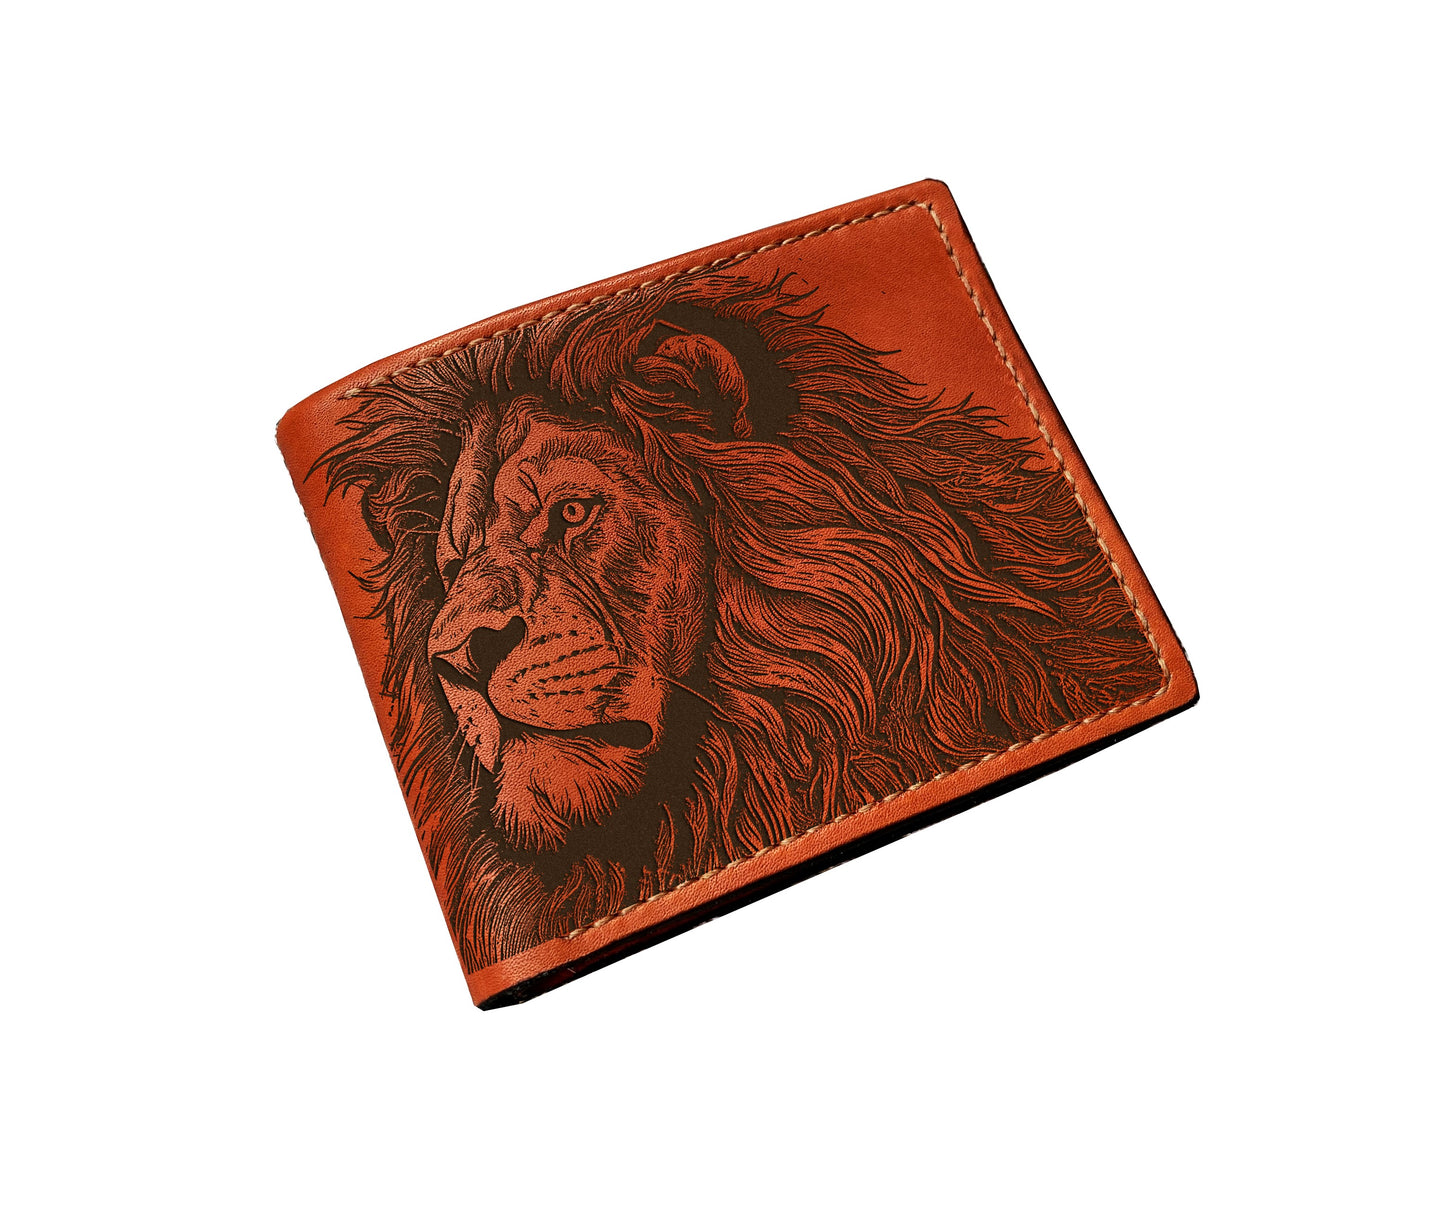 Lion drawing leather men's wallet, personalized leather handmade gift for men, animal art wallet, Lion gift idea for dad, husband, boyfriend